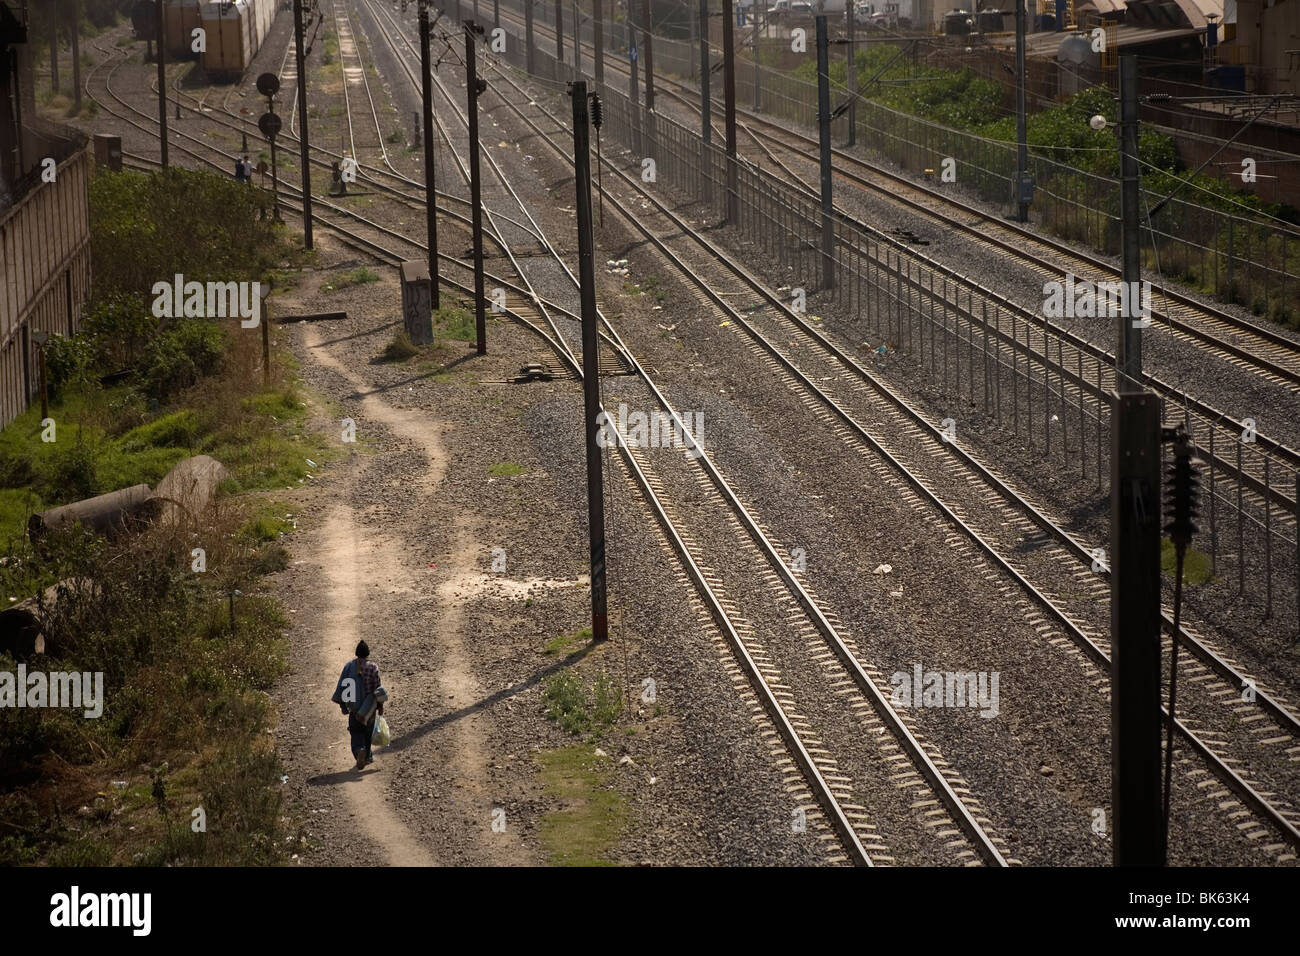 An undocumented Central American migrant traveling across Mexico to United States walks along the railroad tracks in Mexico City Stock Photo